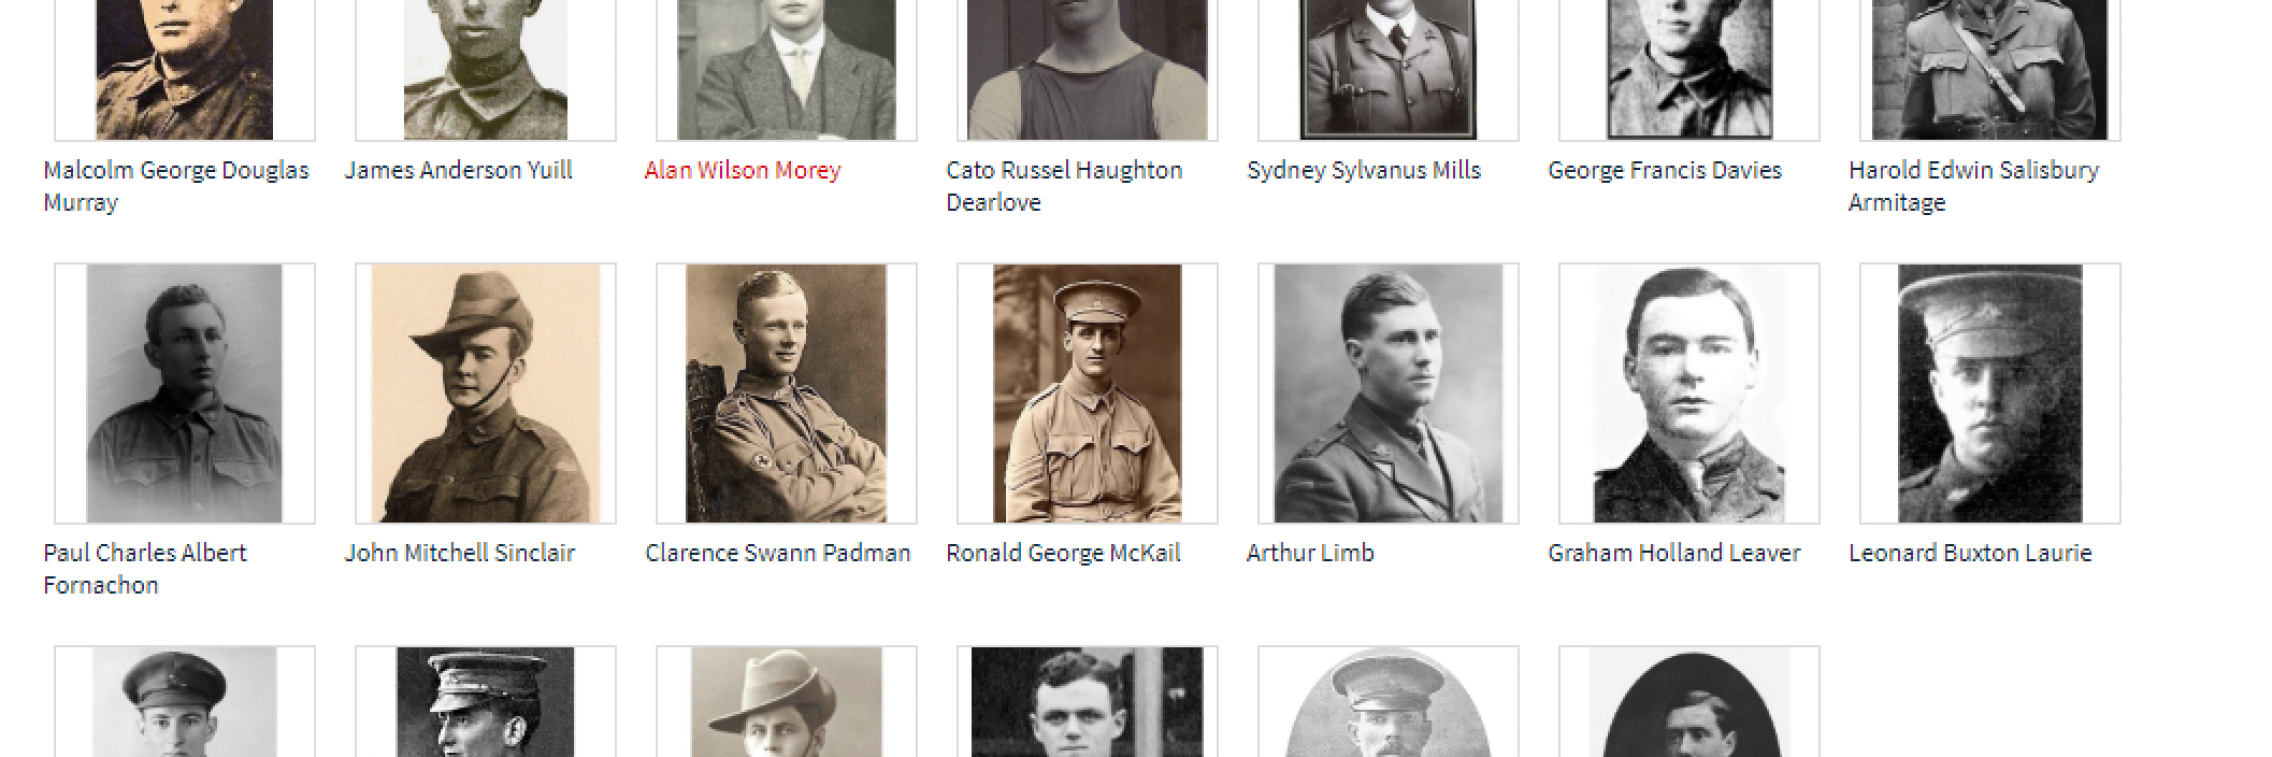 Image shows a snapshot of photos of University of Adelaide students who died as soldiers in World War 1